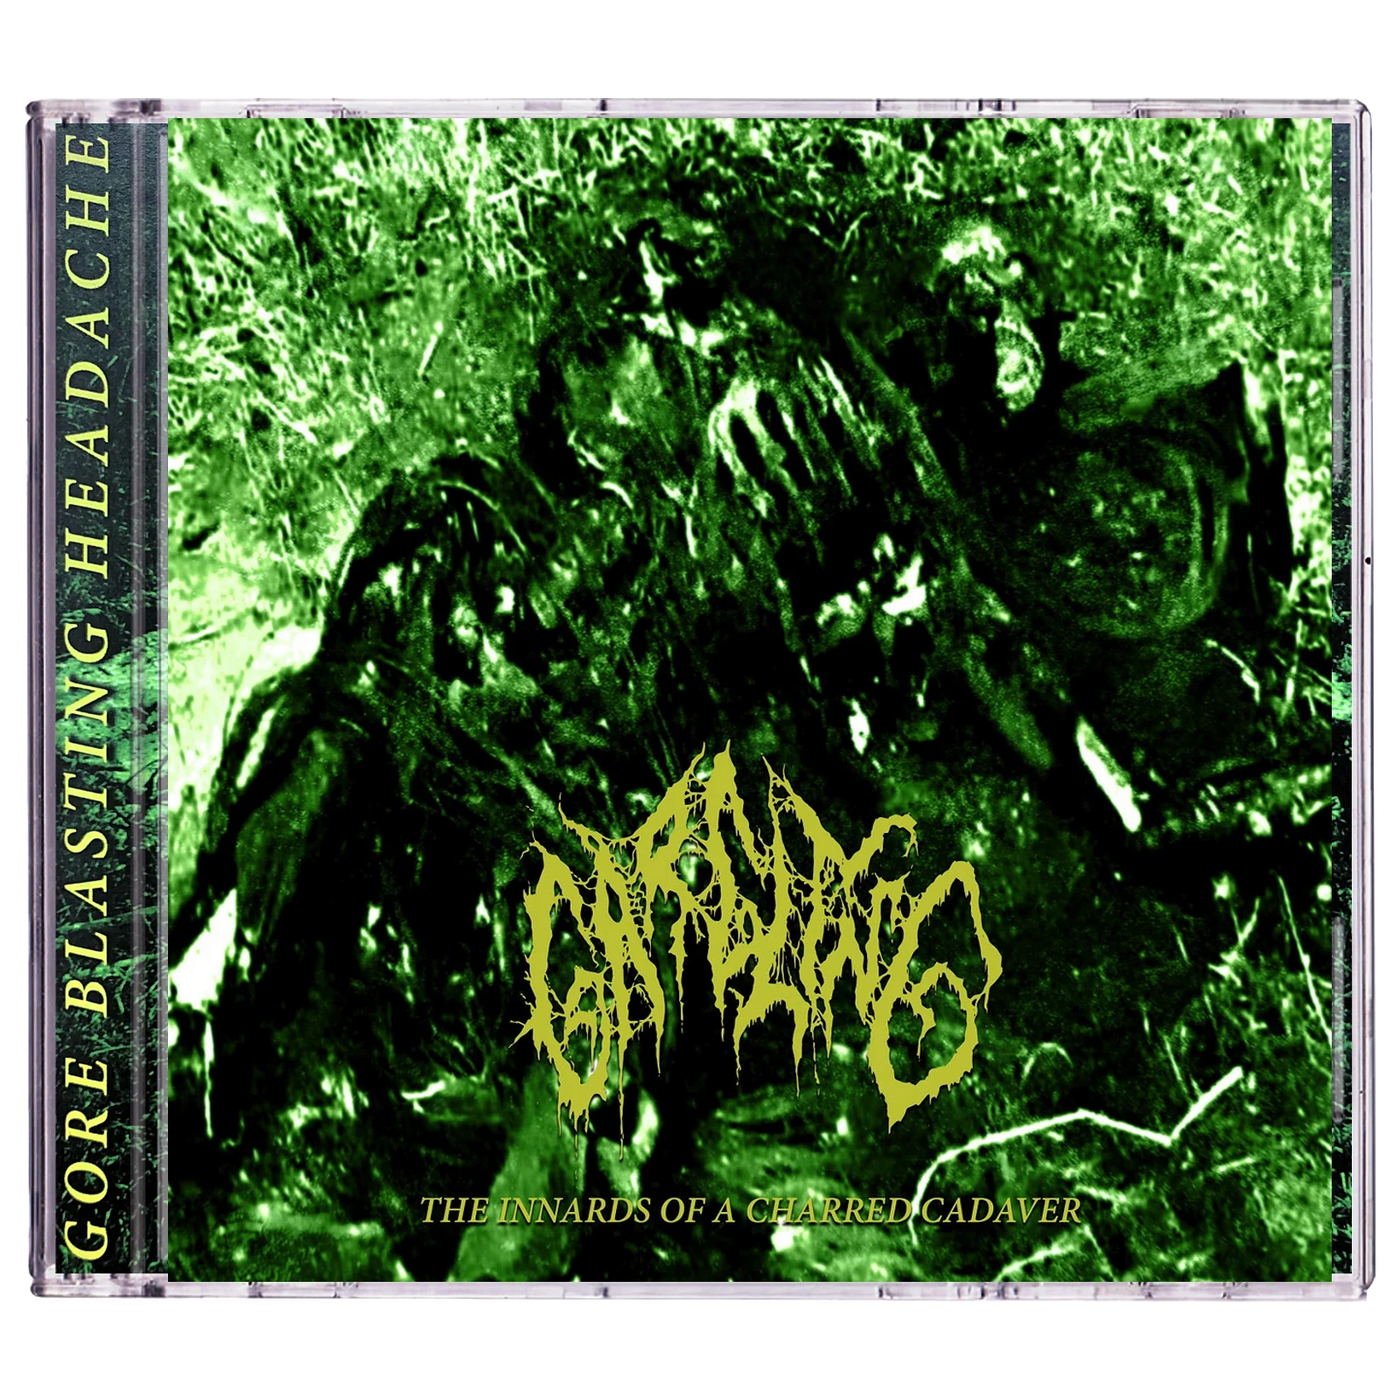 Gargling 'The Innards Of A Charred Cadaver' CD